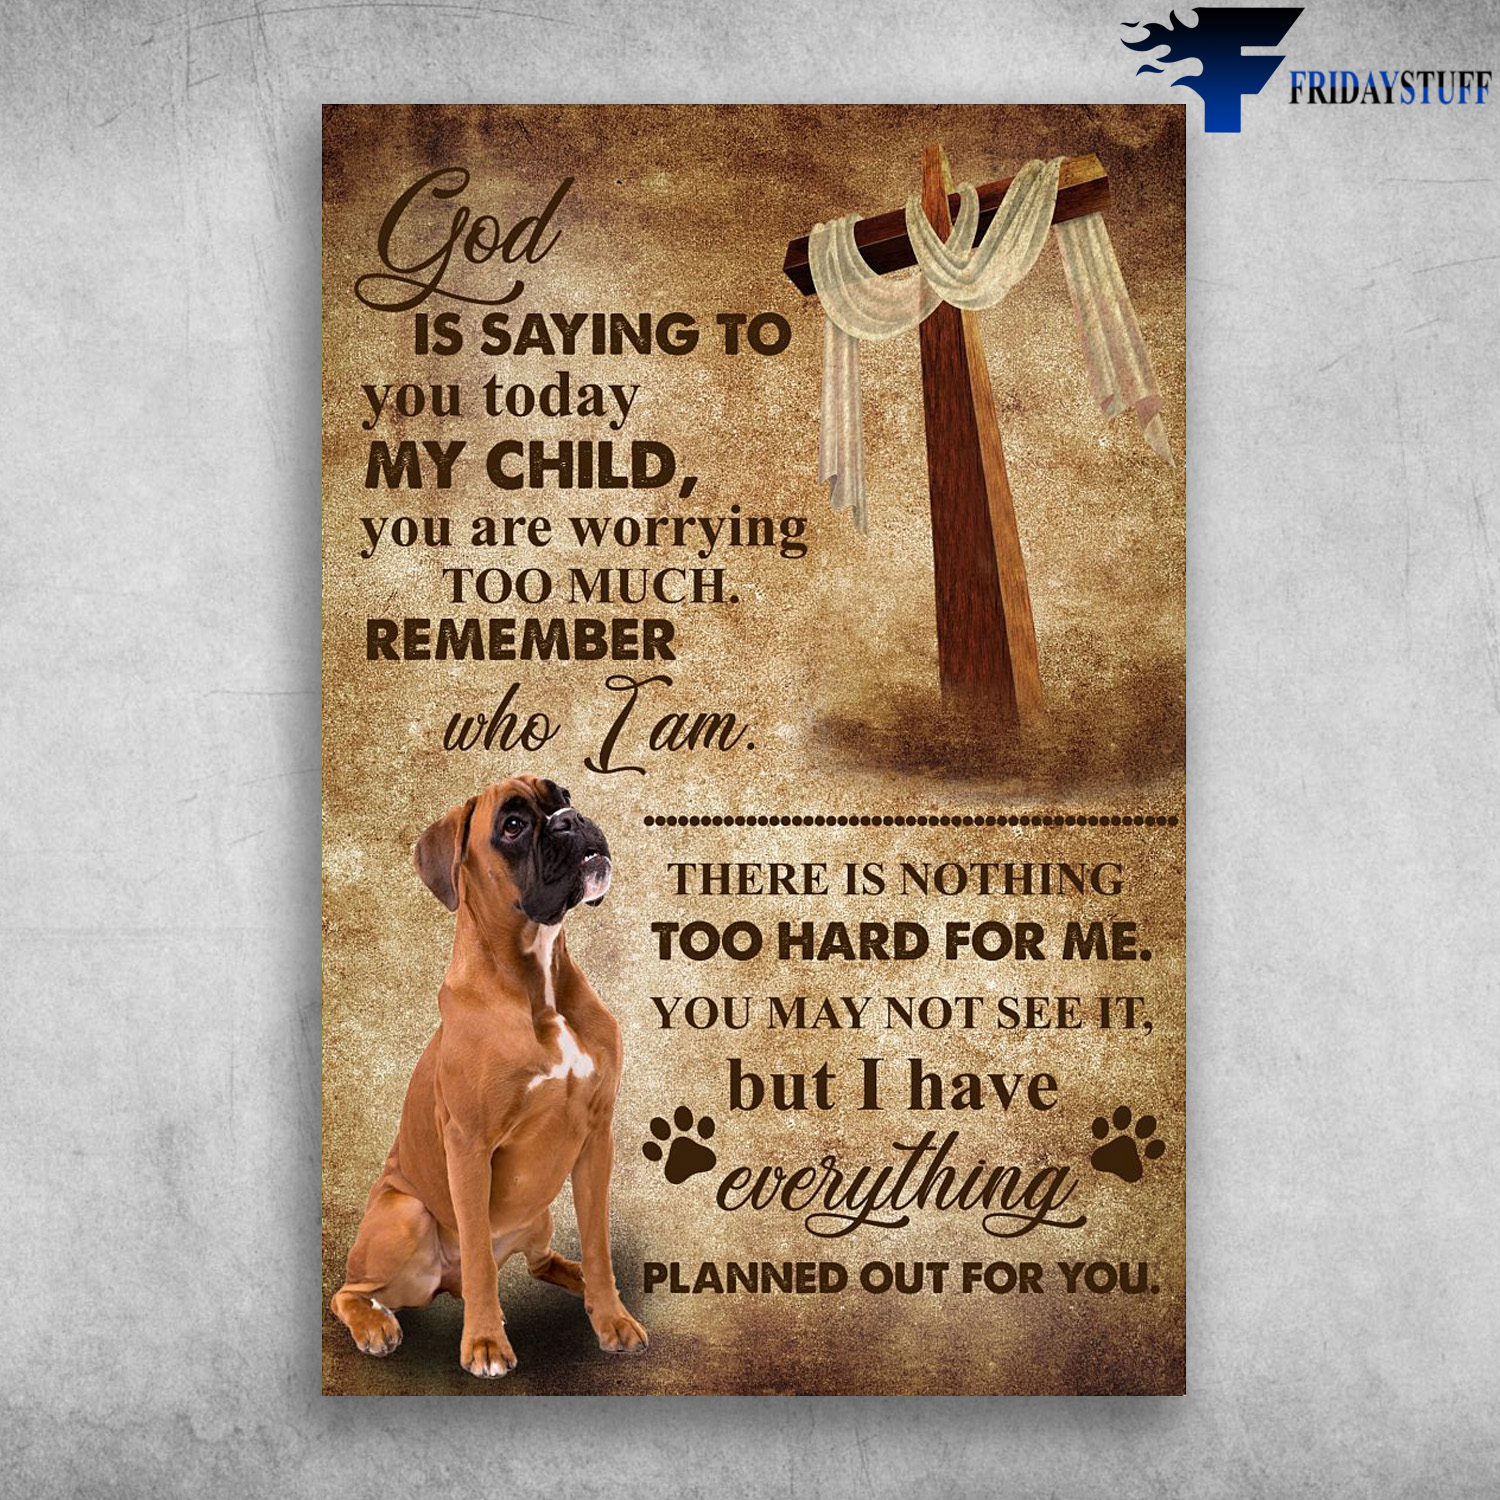 Boxer Dog - God is saying to you To Day, My Child, You Are Worrying Too Much, Remember Who I Am, There Is Nothing Too Hard For Me, You May Not See It, But I Have Everythin Planned Out For You